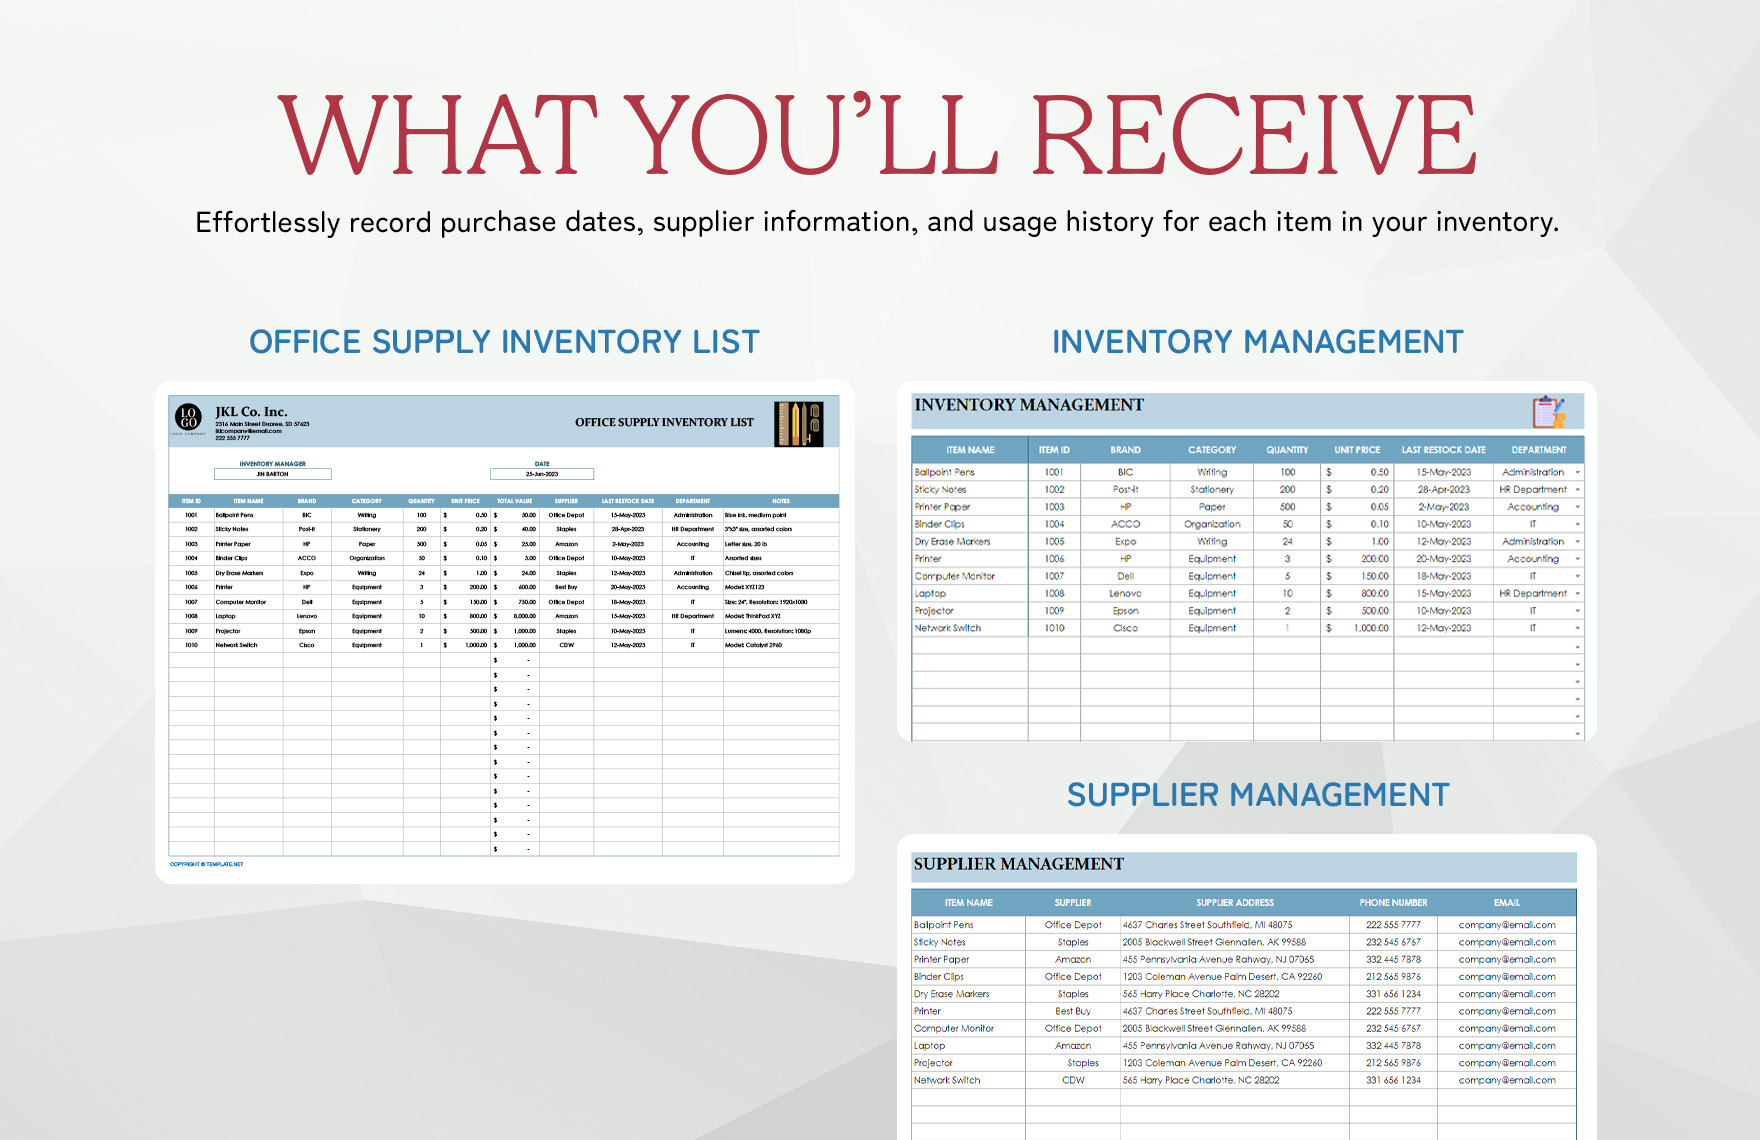 Office Supply Inventory List Template